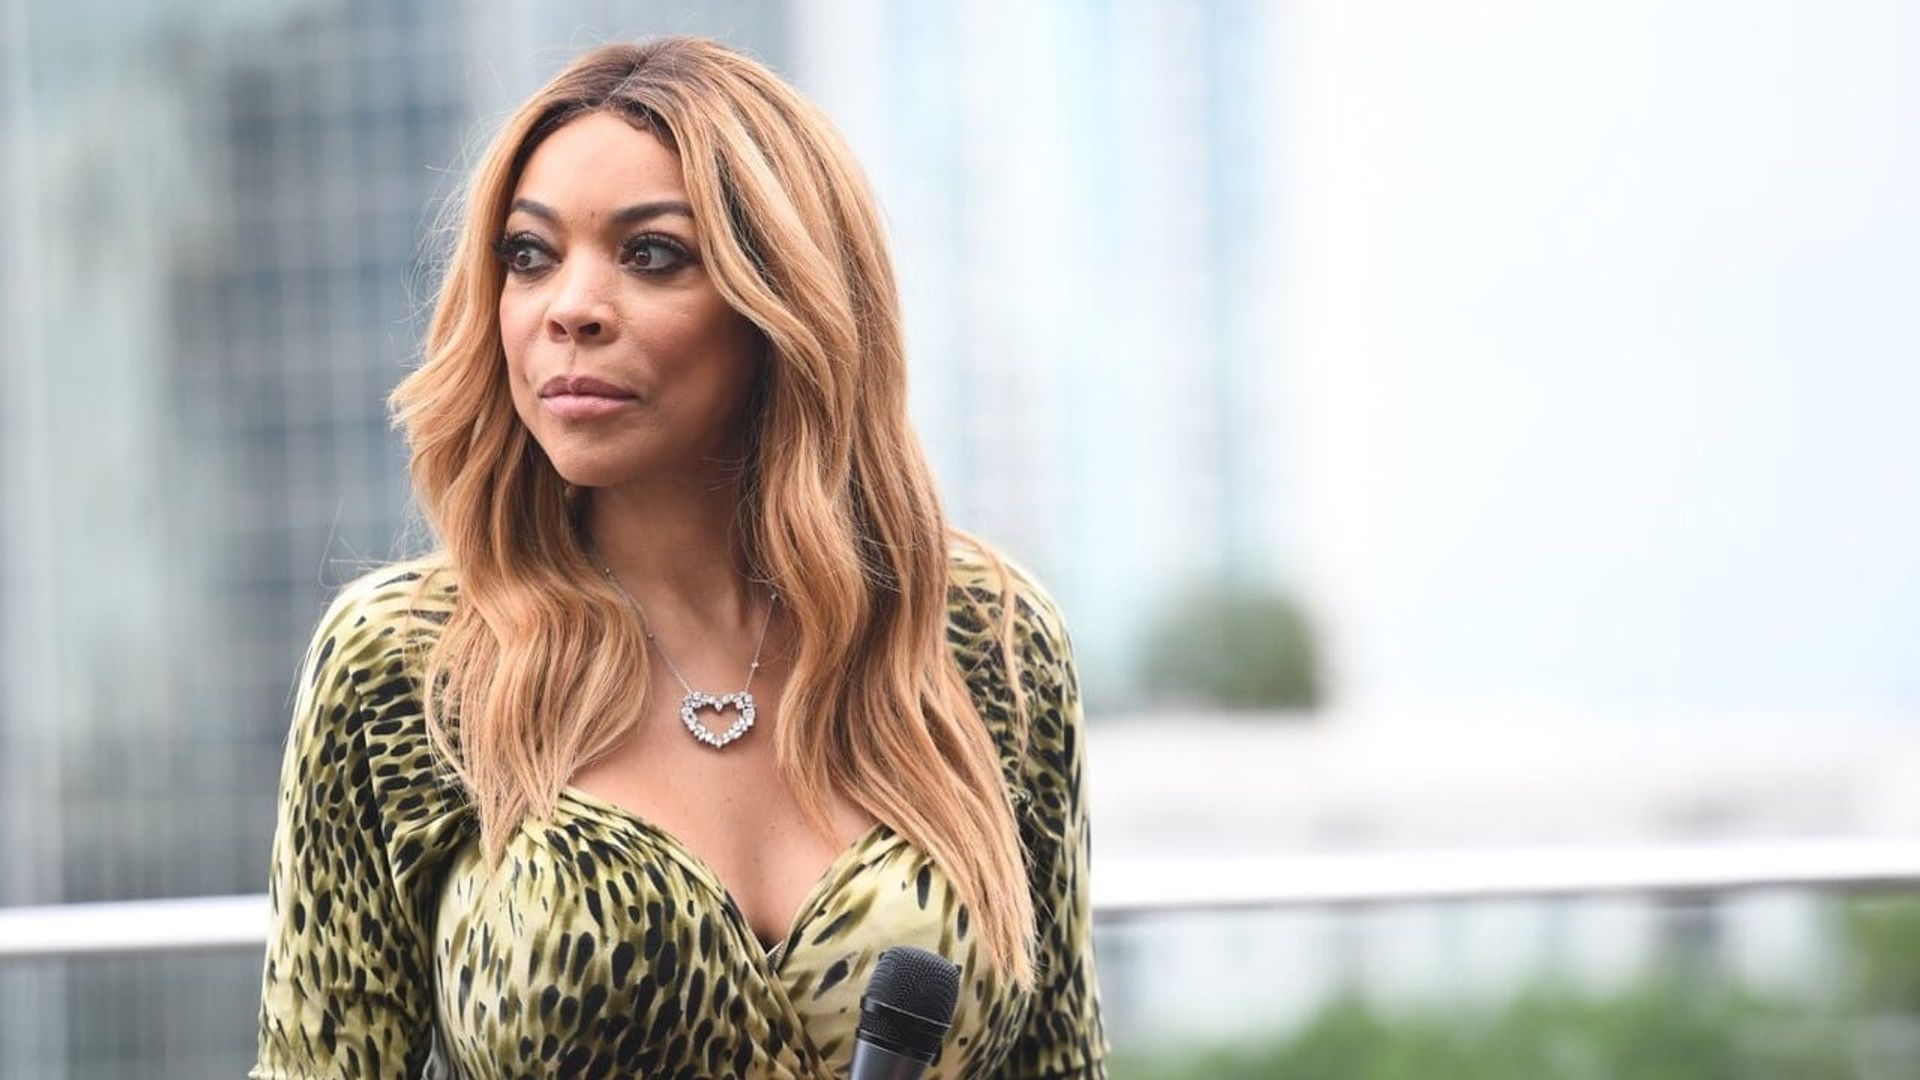 Wendy Williams: What a Mess! background